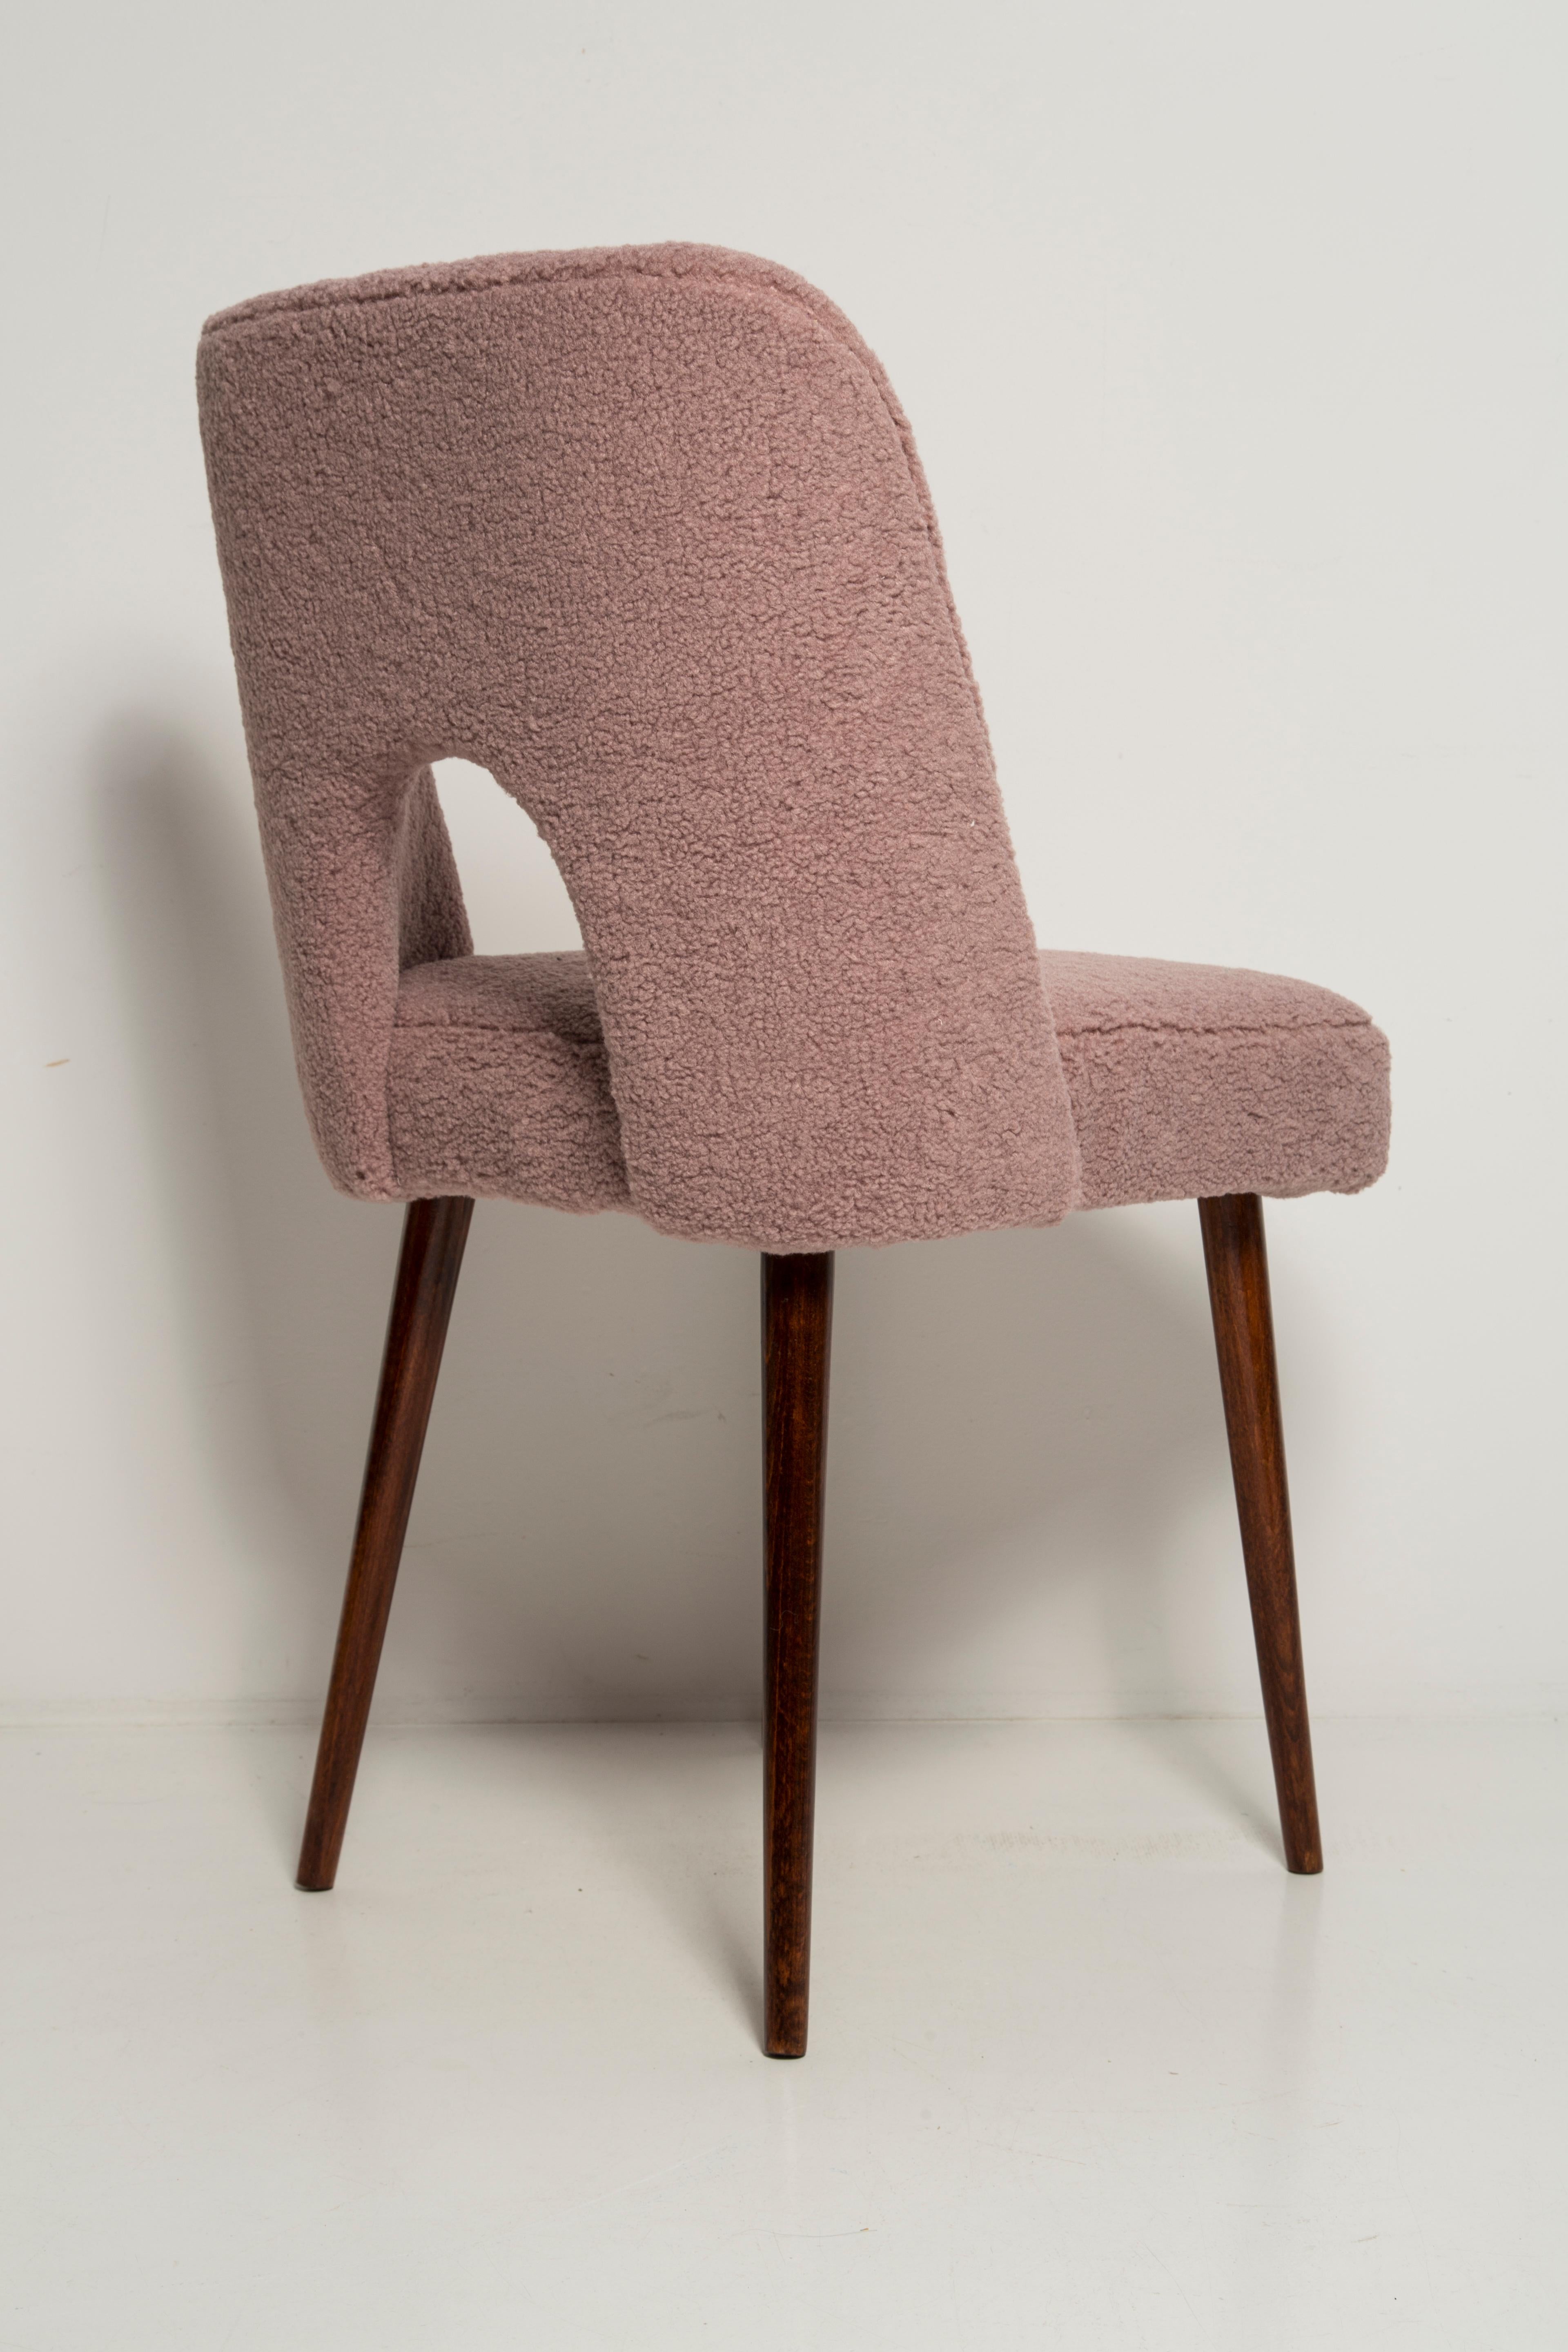 Set of Eight Pink Boucle 'Shell' Chairs, Europe, 1960s For Sale 1